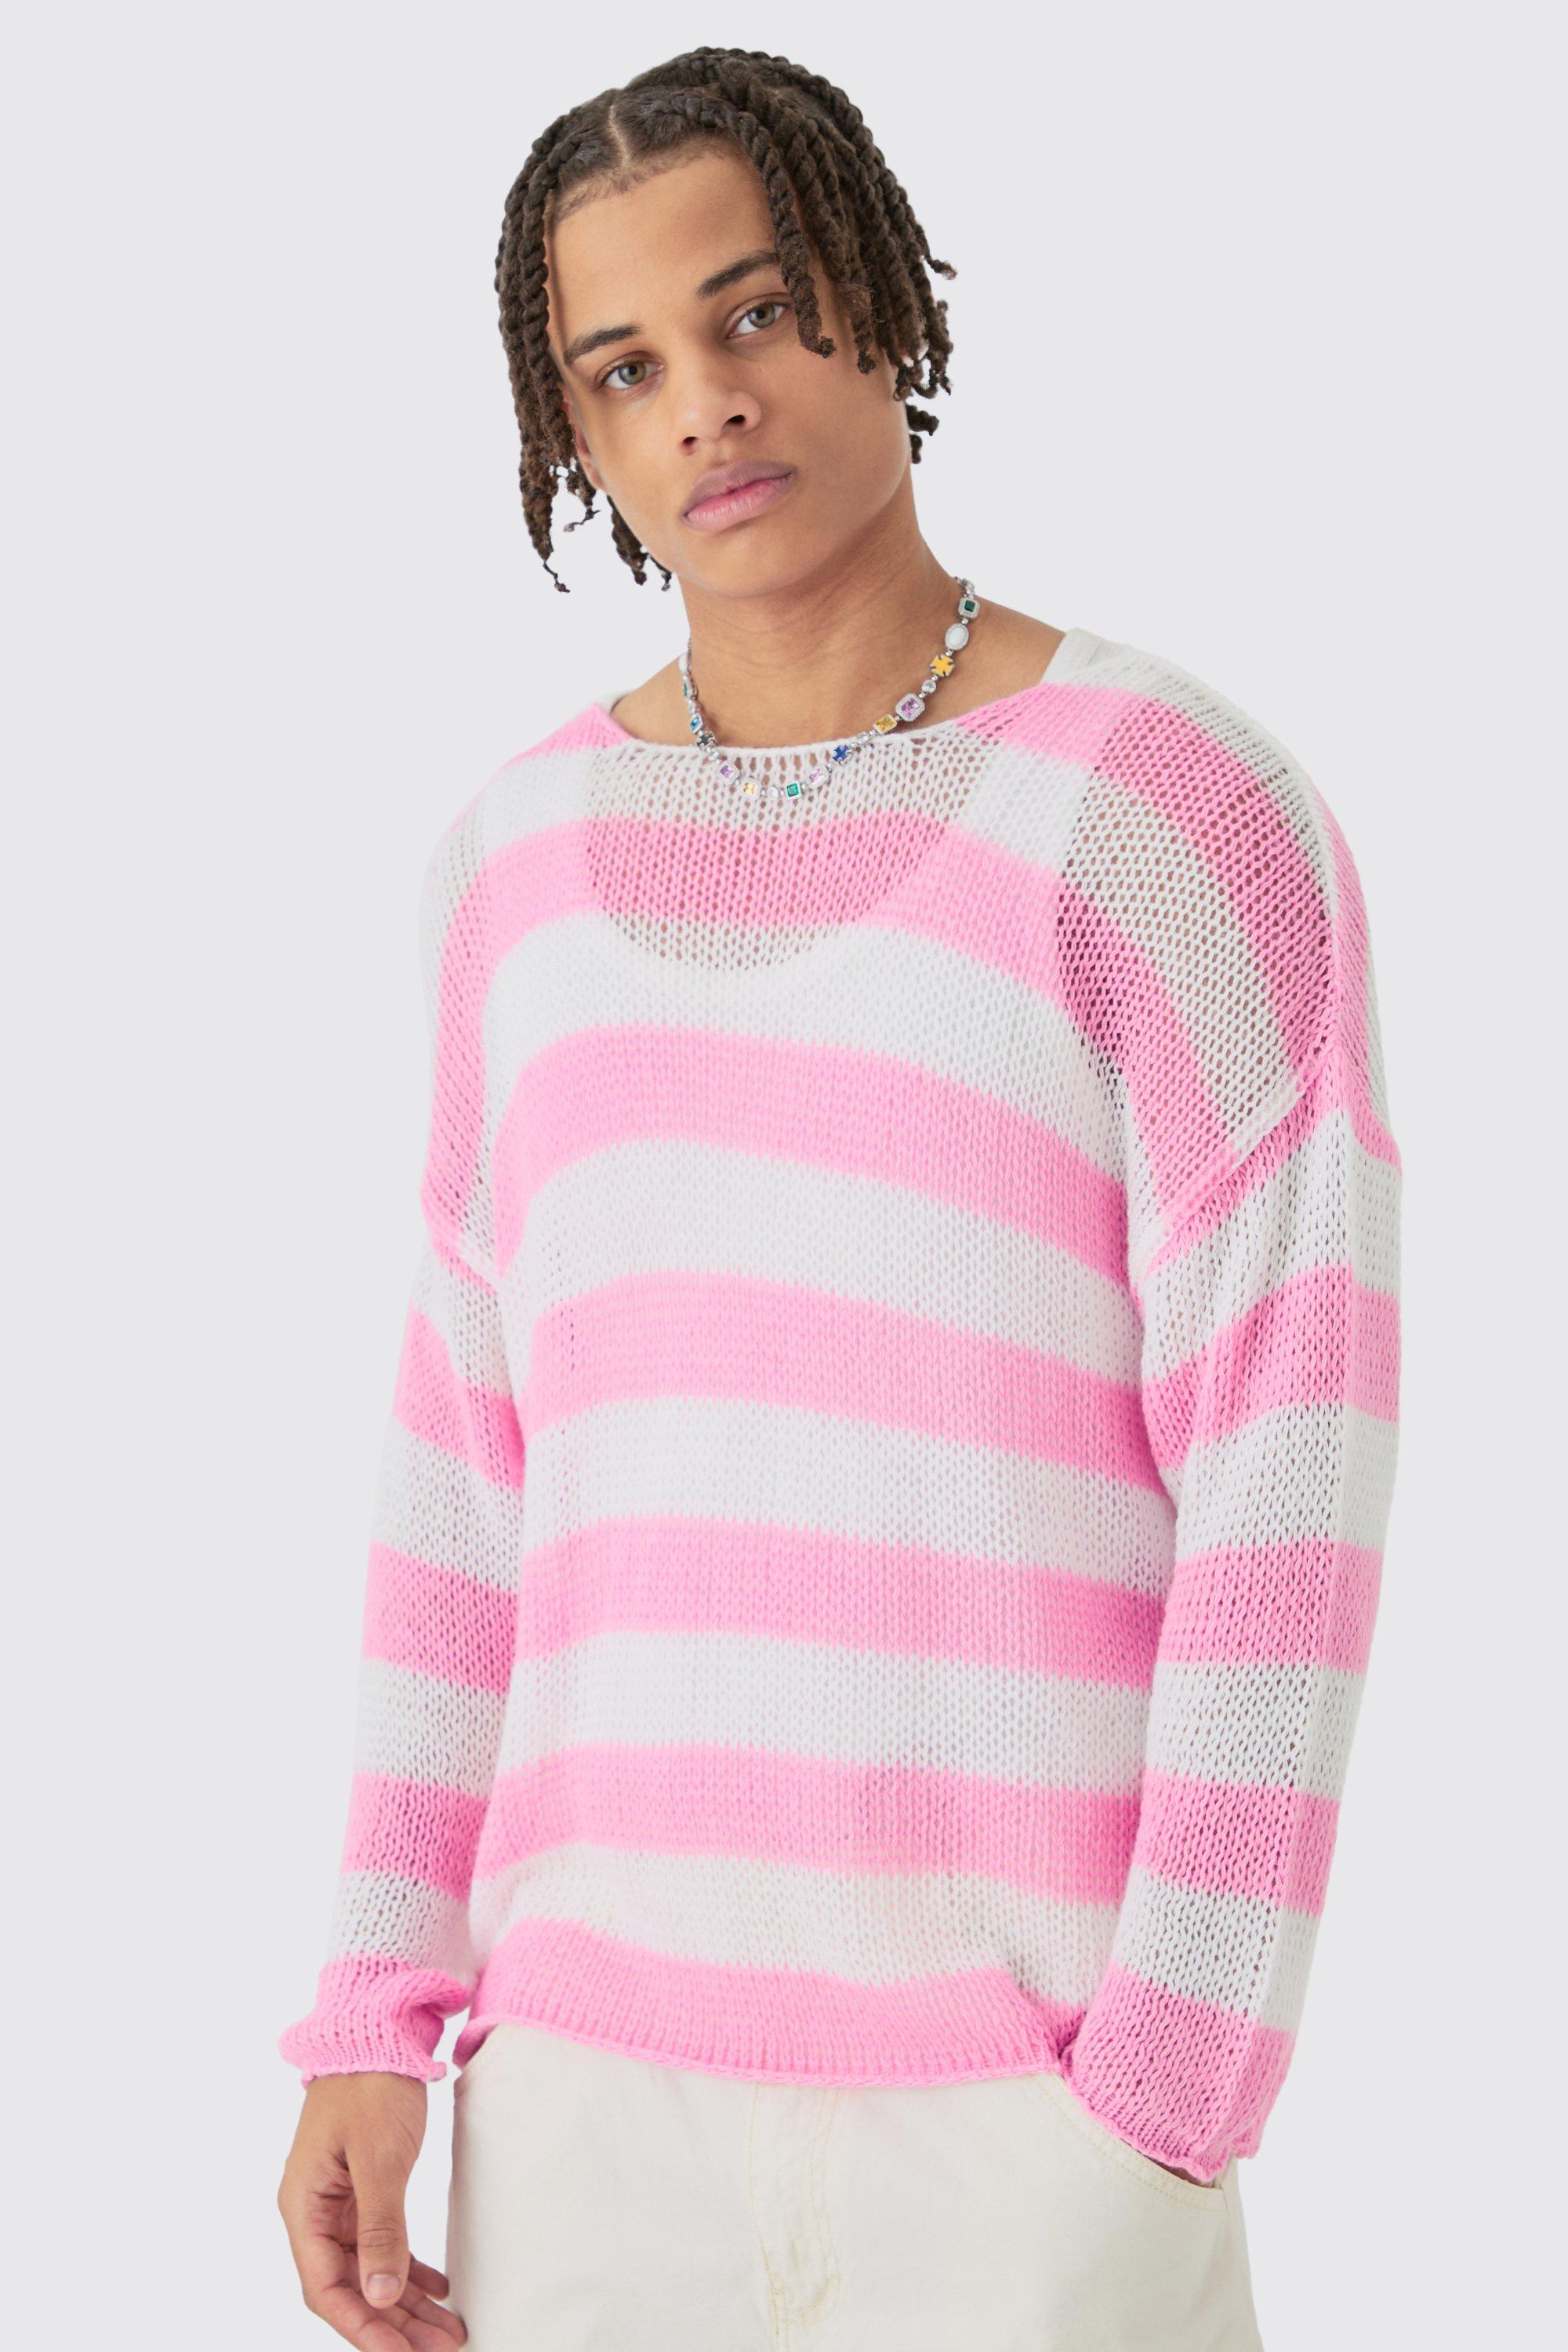 Image of Oversized Boxy Open Knit Stripe Jumper In Pink, Pink